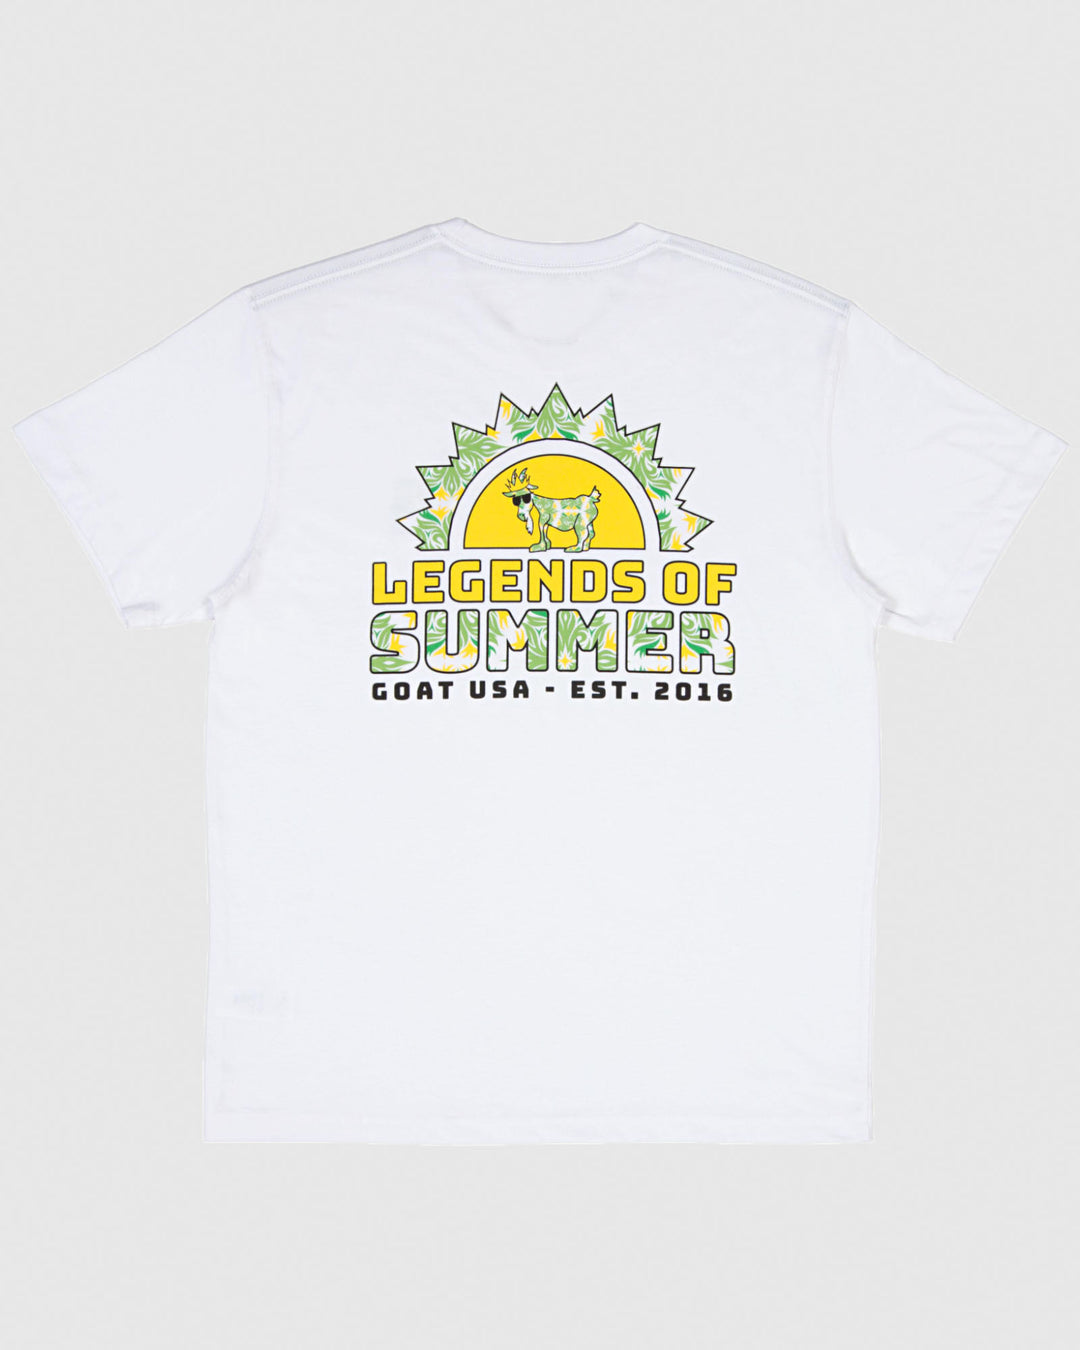 White t-shirt with sun design and yellow/green floral pattern